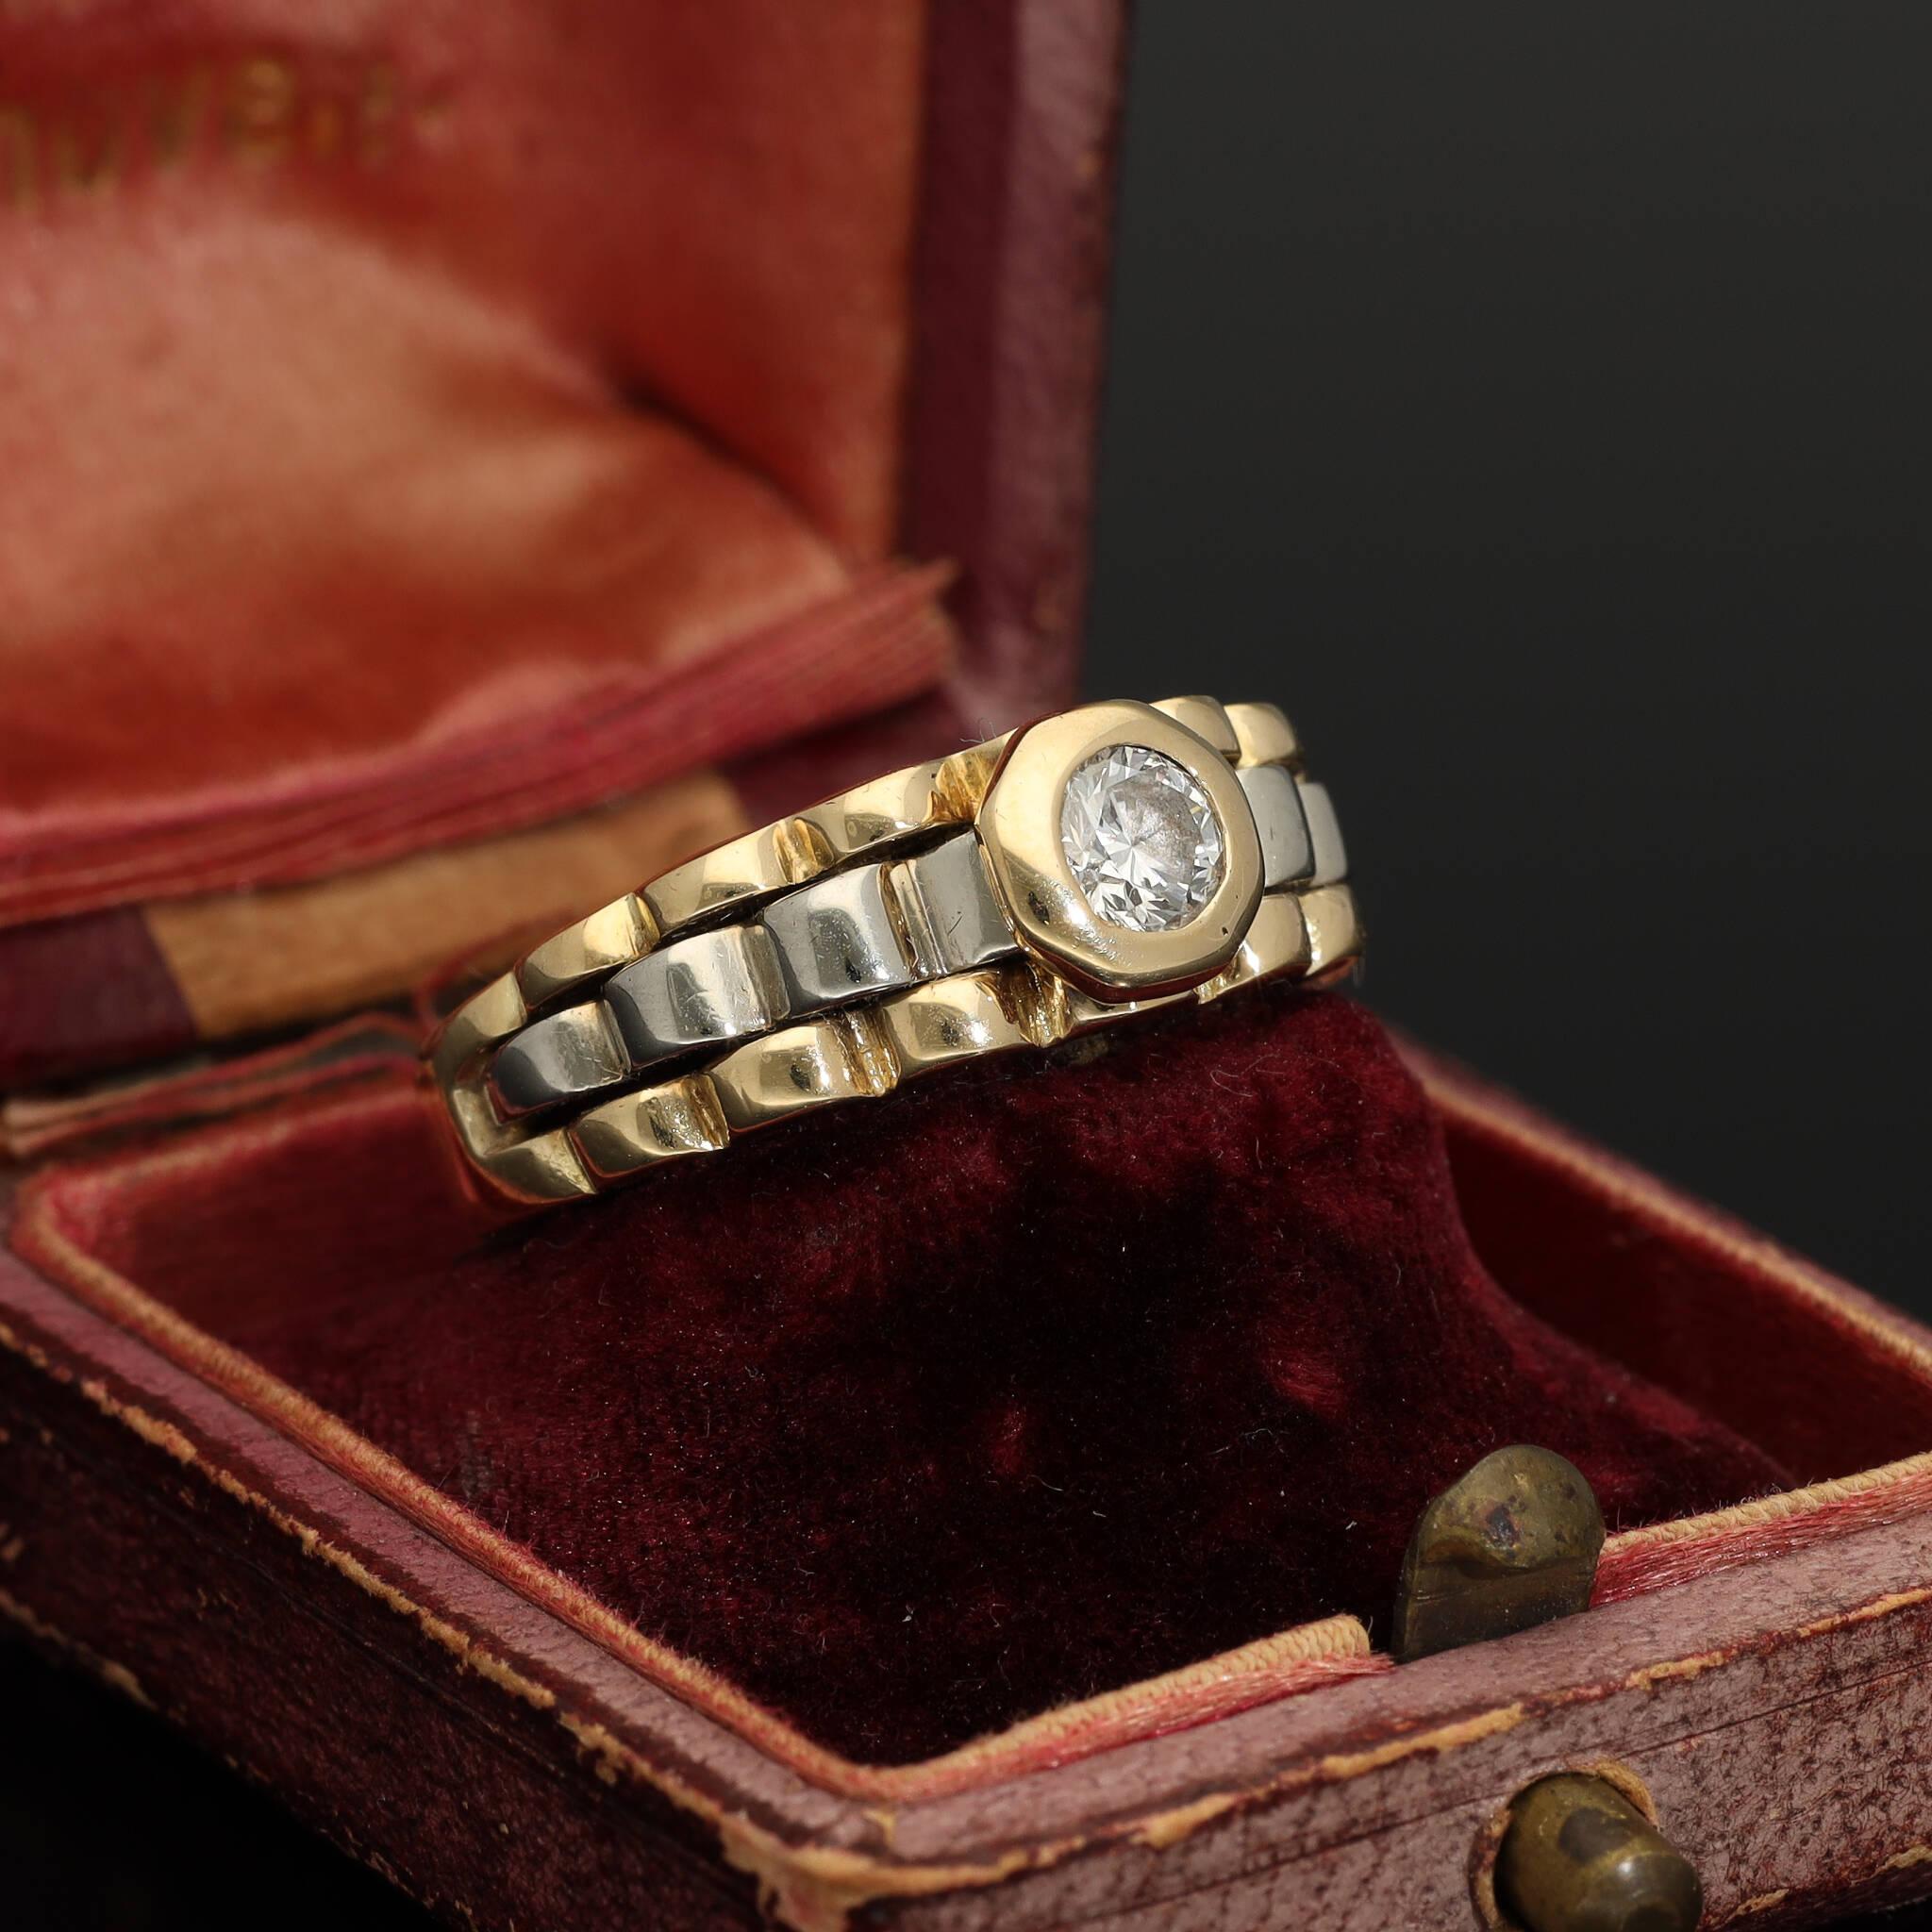 An unbelievably classy Austrian antique diamond solitaire dating back to the year 1925. This posh and heavy ring is crafted in solid 585 (14 karat gold) and has a high-end elegant look!

The band is made in link chain style with a mix of yellow and